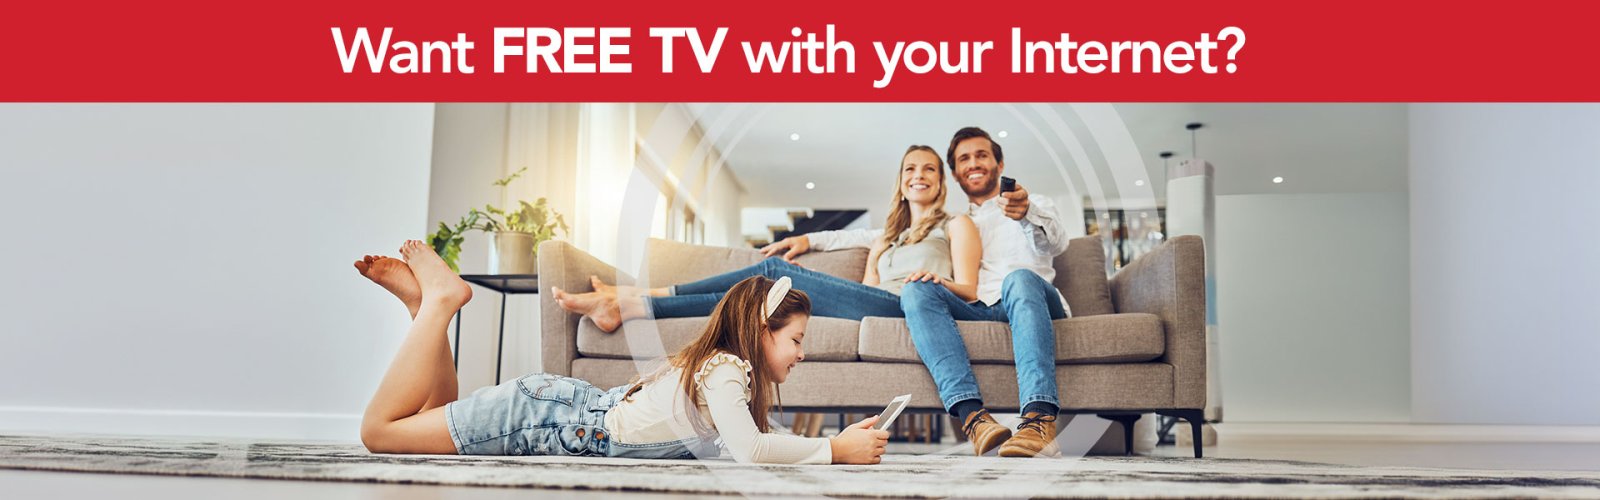 family on coach with child sitting on floor watching tv image, internet and cable tv bundle, internet bundle, cable tv bundle, tivo+